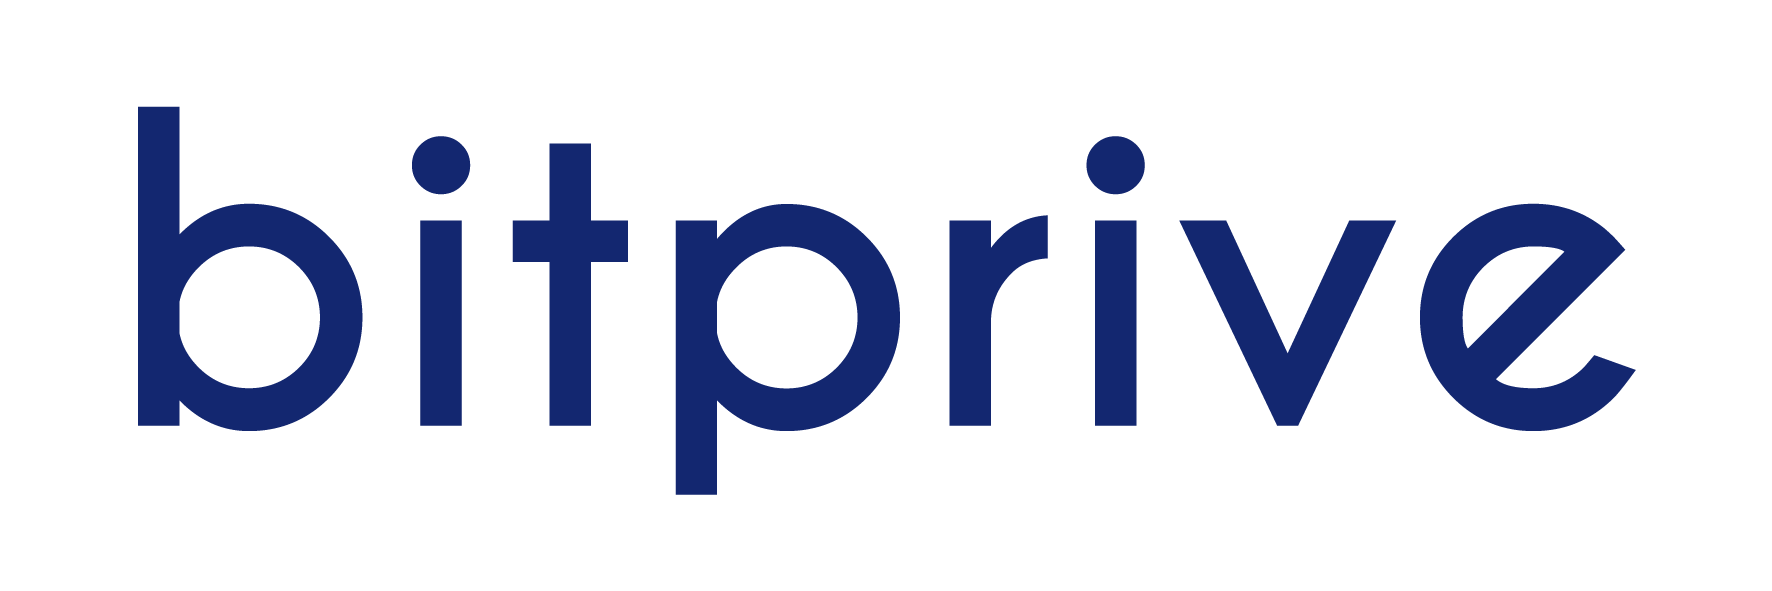 Article about Inside Bitprive, the OTC marketplace for digital assets